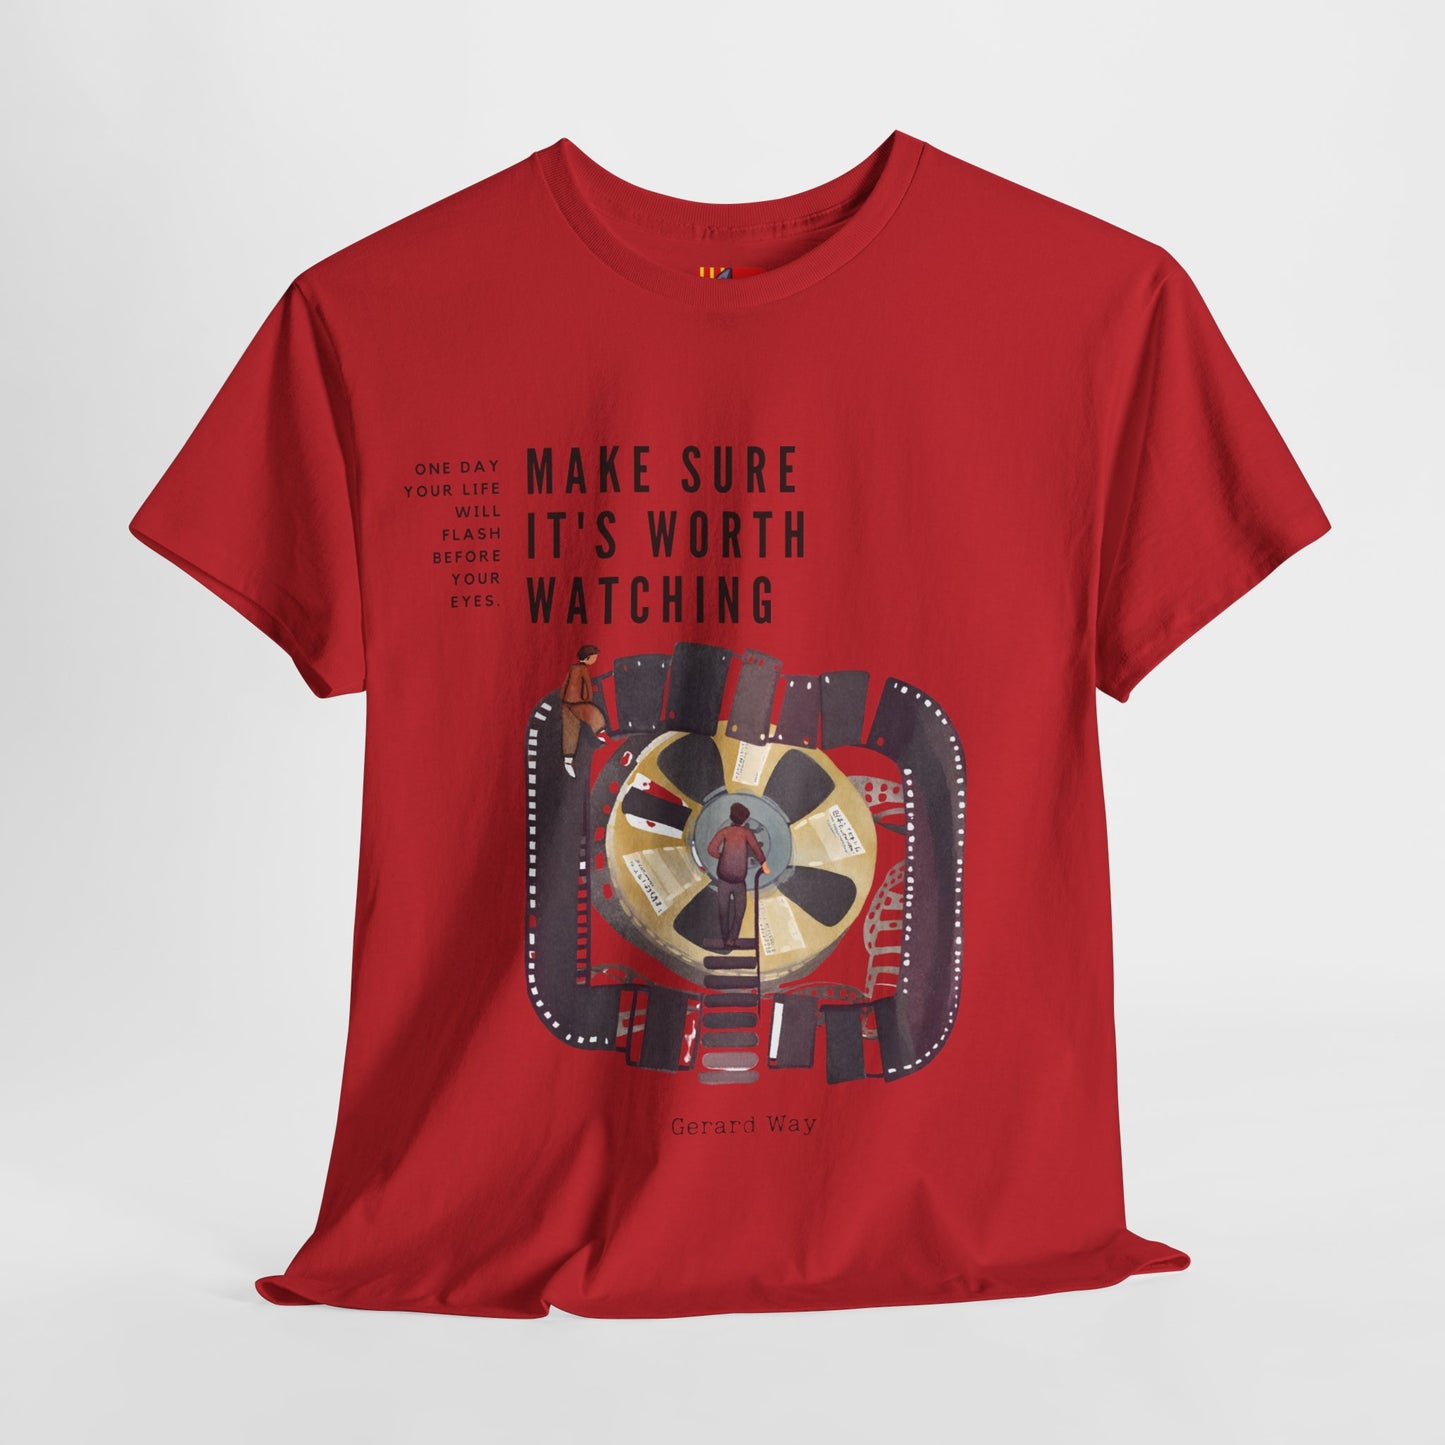 The Live Boldly T-Shirt: Make Your Story Epic"One day your life will flash..." Gerard Way